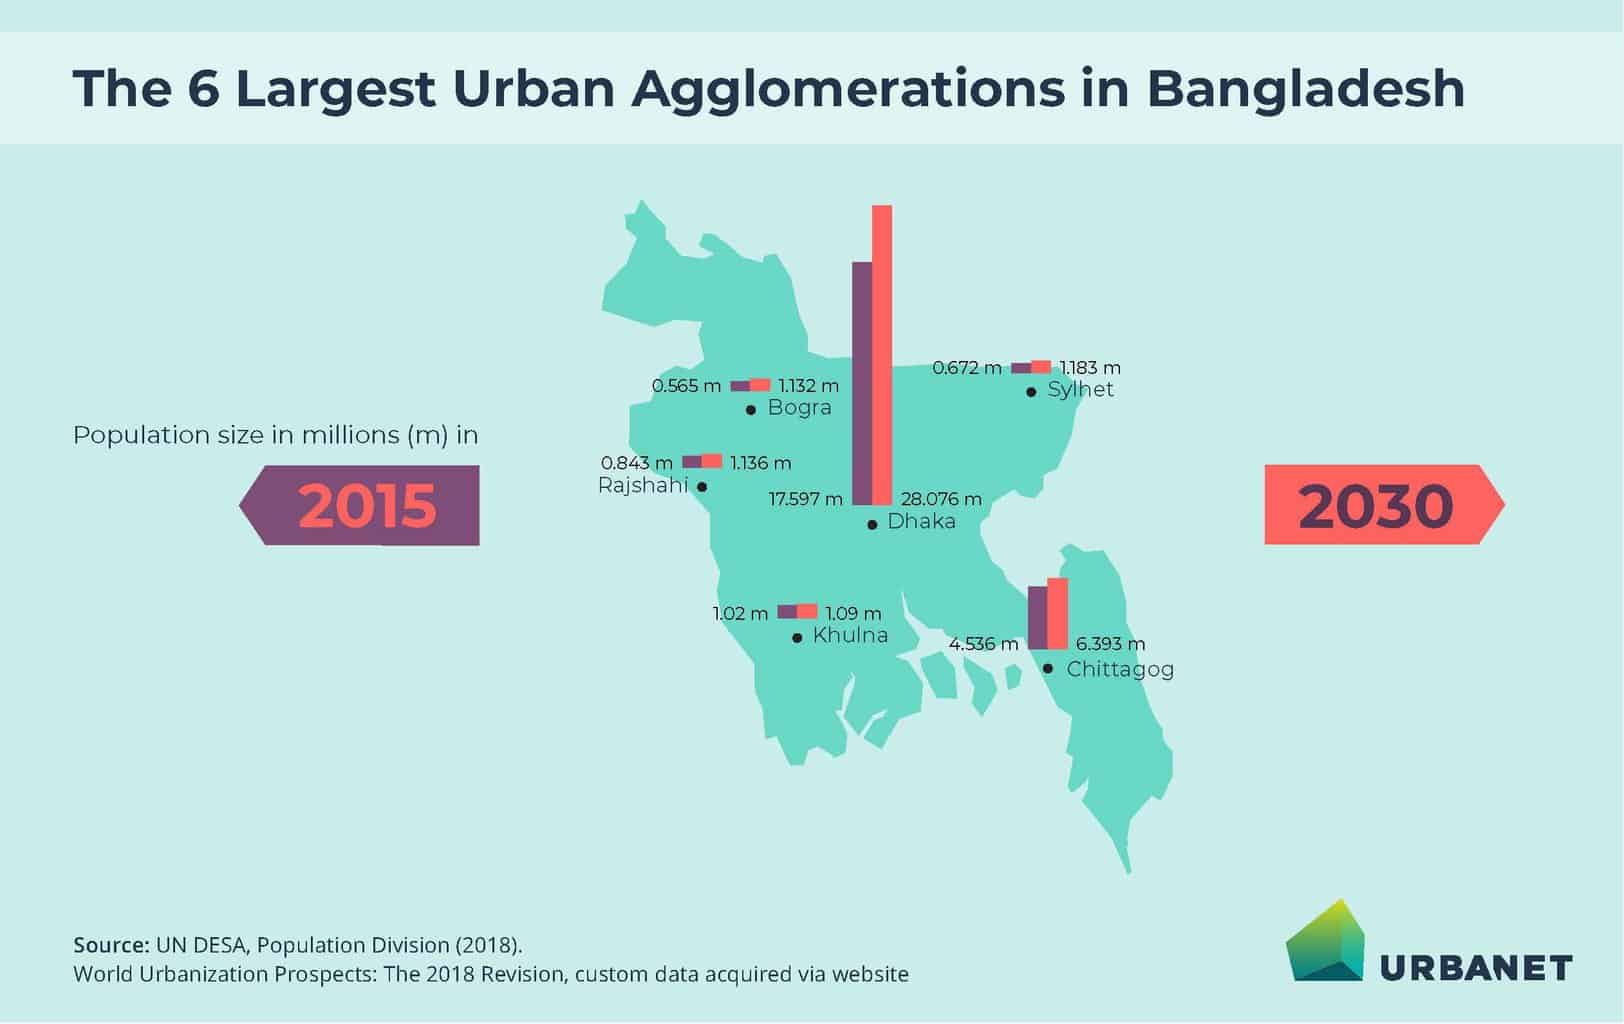 Urbanisation in Bangladesh will accelerate in the future, with all of the country's six largest cities projected to grow in population over the next years.